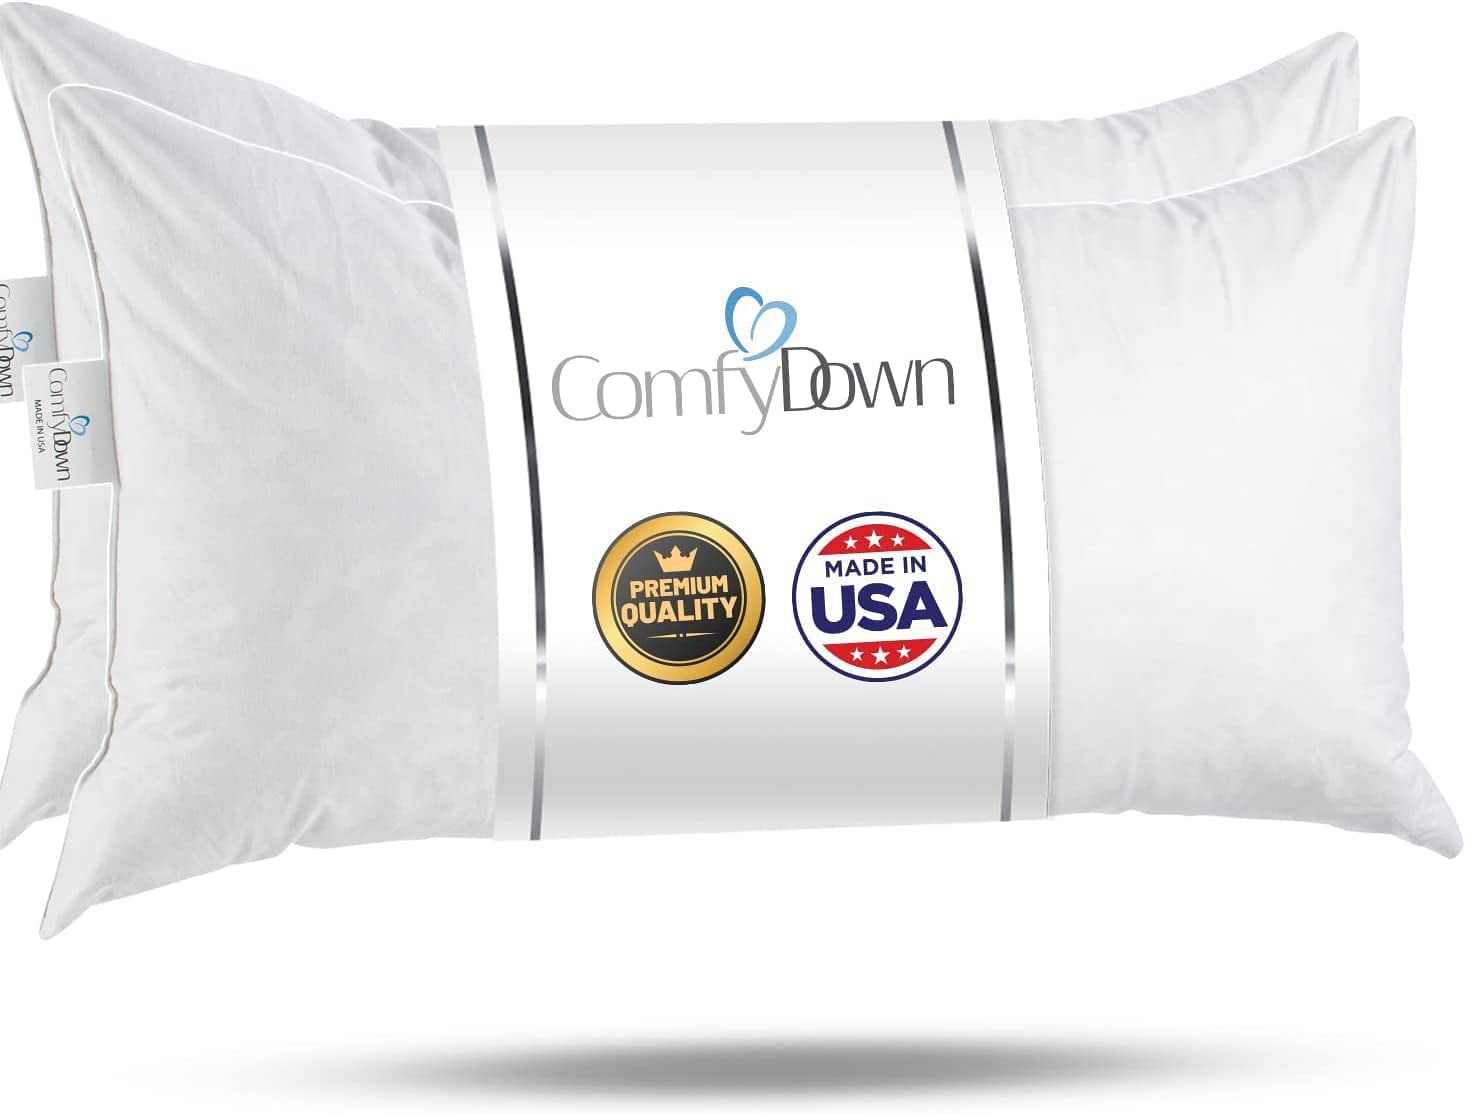 12x20 inch Luxury Goose Down Feather Pillow inserts – Cotton and Crate